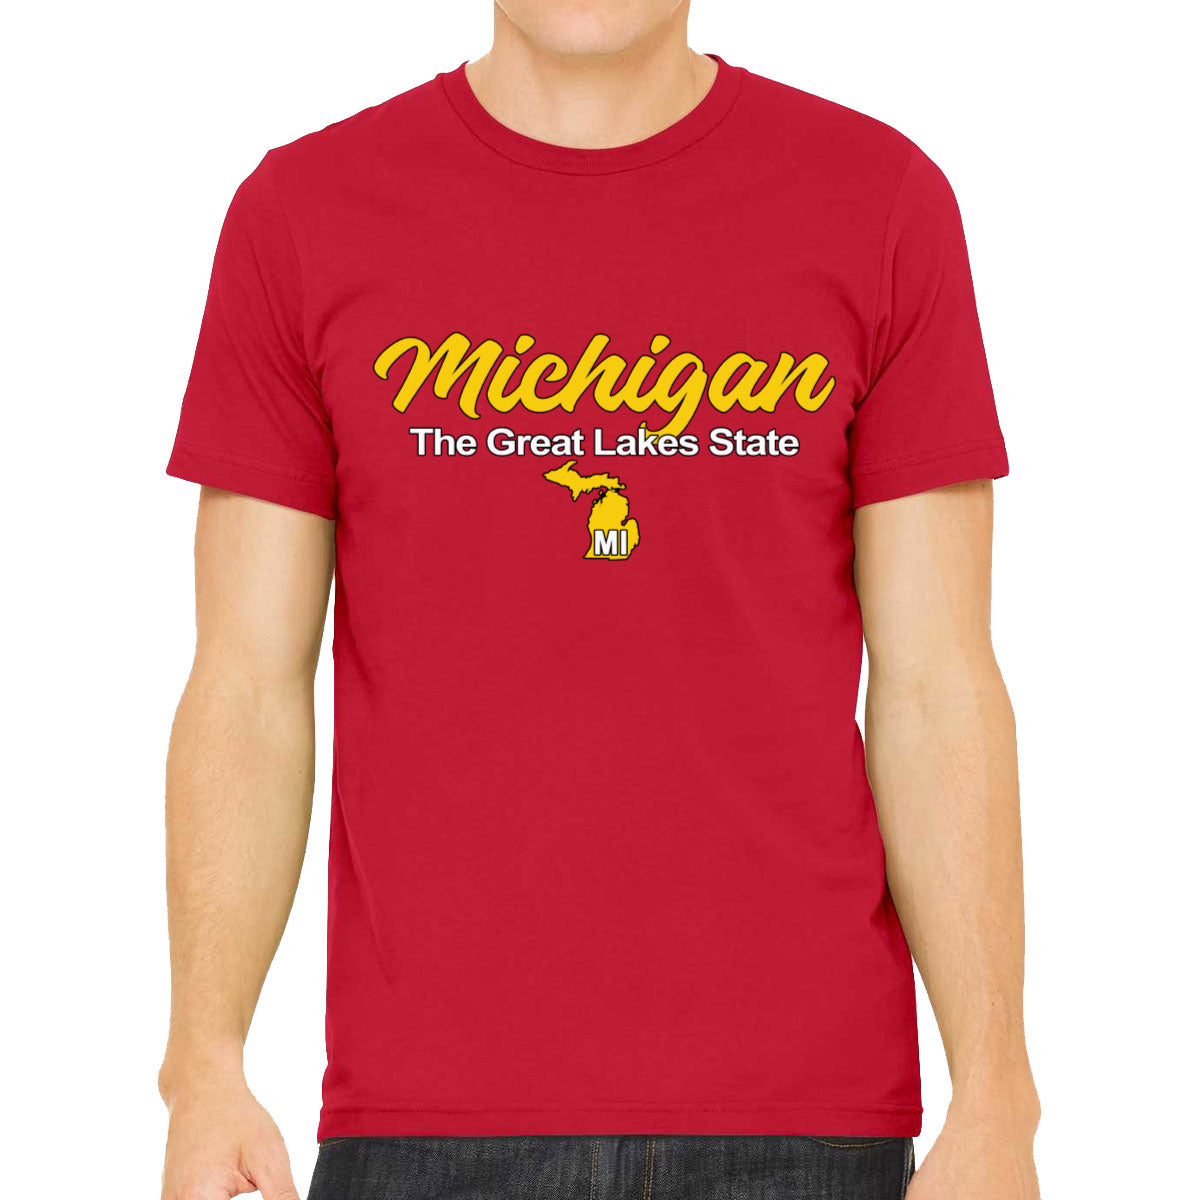 Michigan The Great Lakes State Men's T-shirt